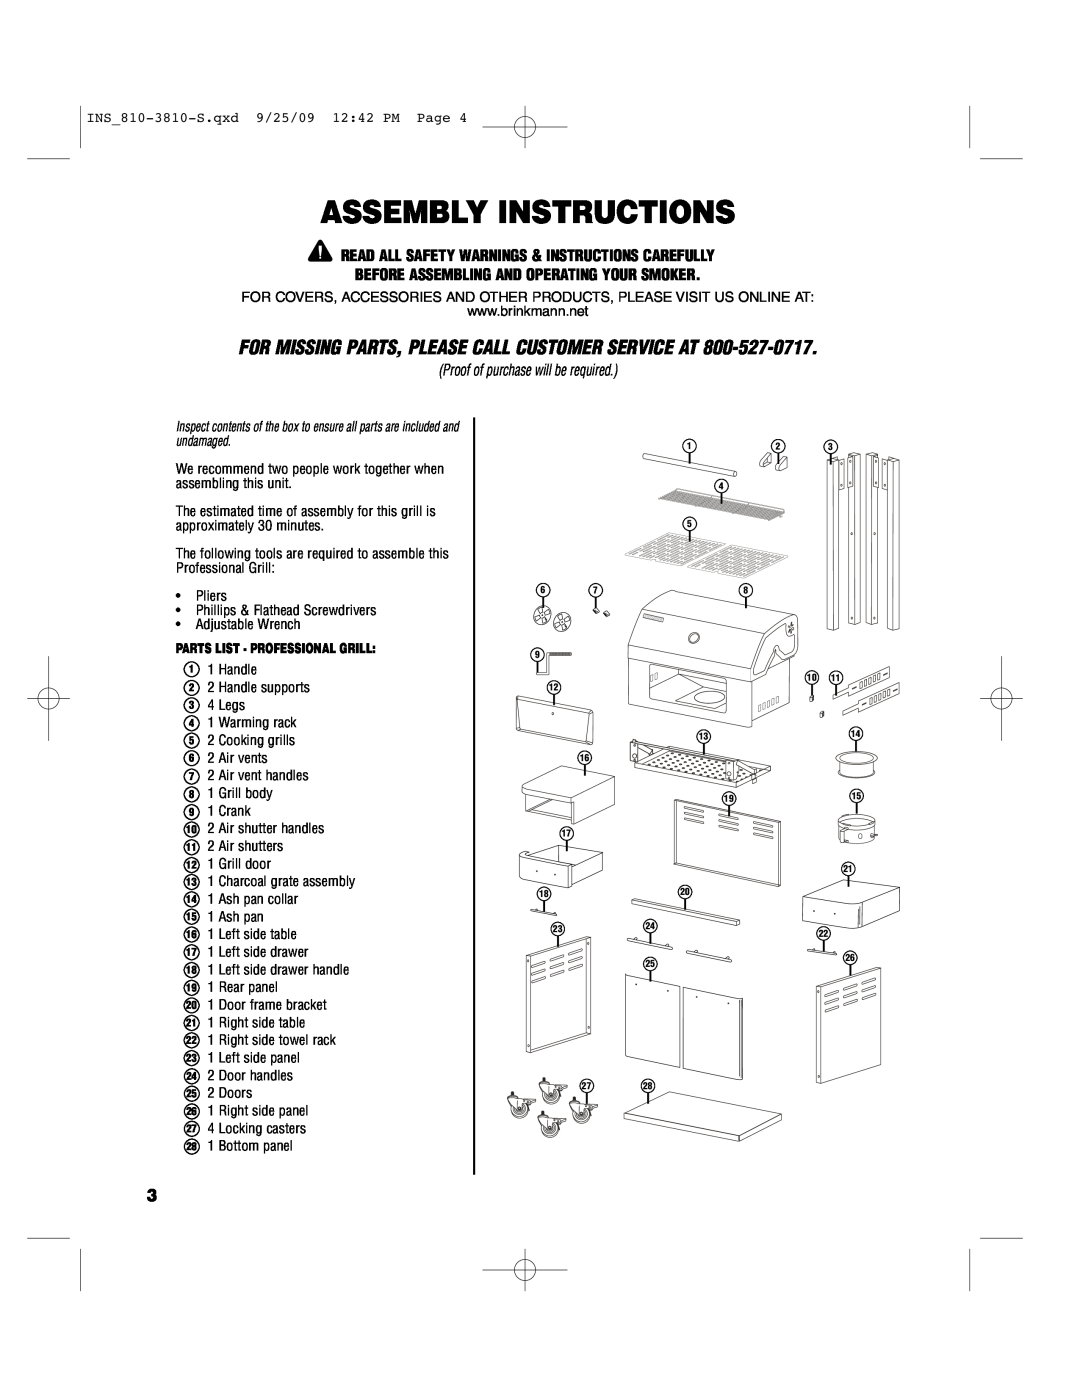 Brinkmann INS_810-3810-S manual Assembly Instructions, Read All Safety Warnings & Instructions Carefully 